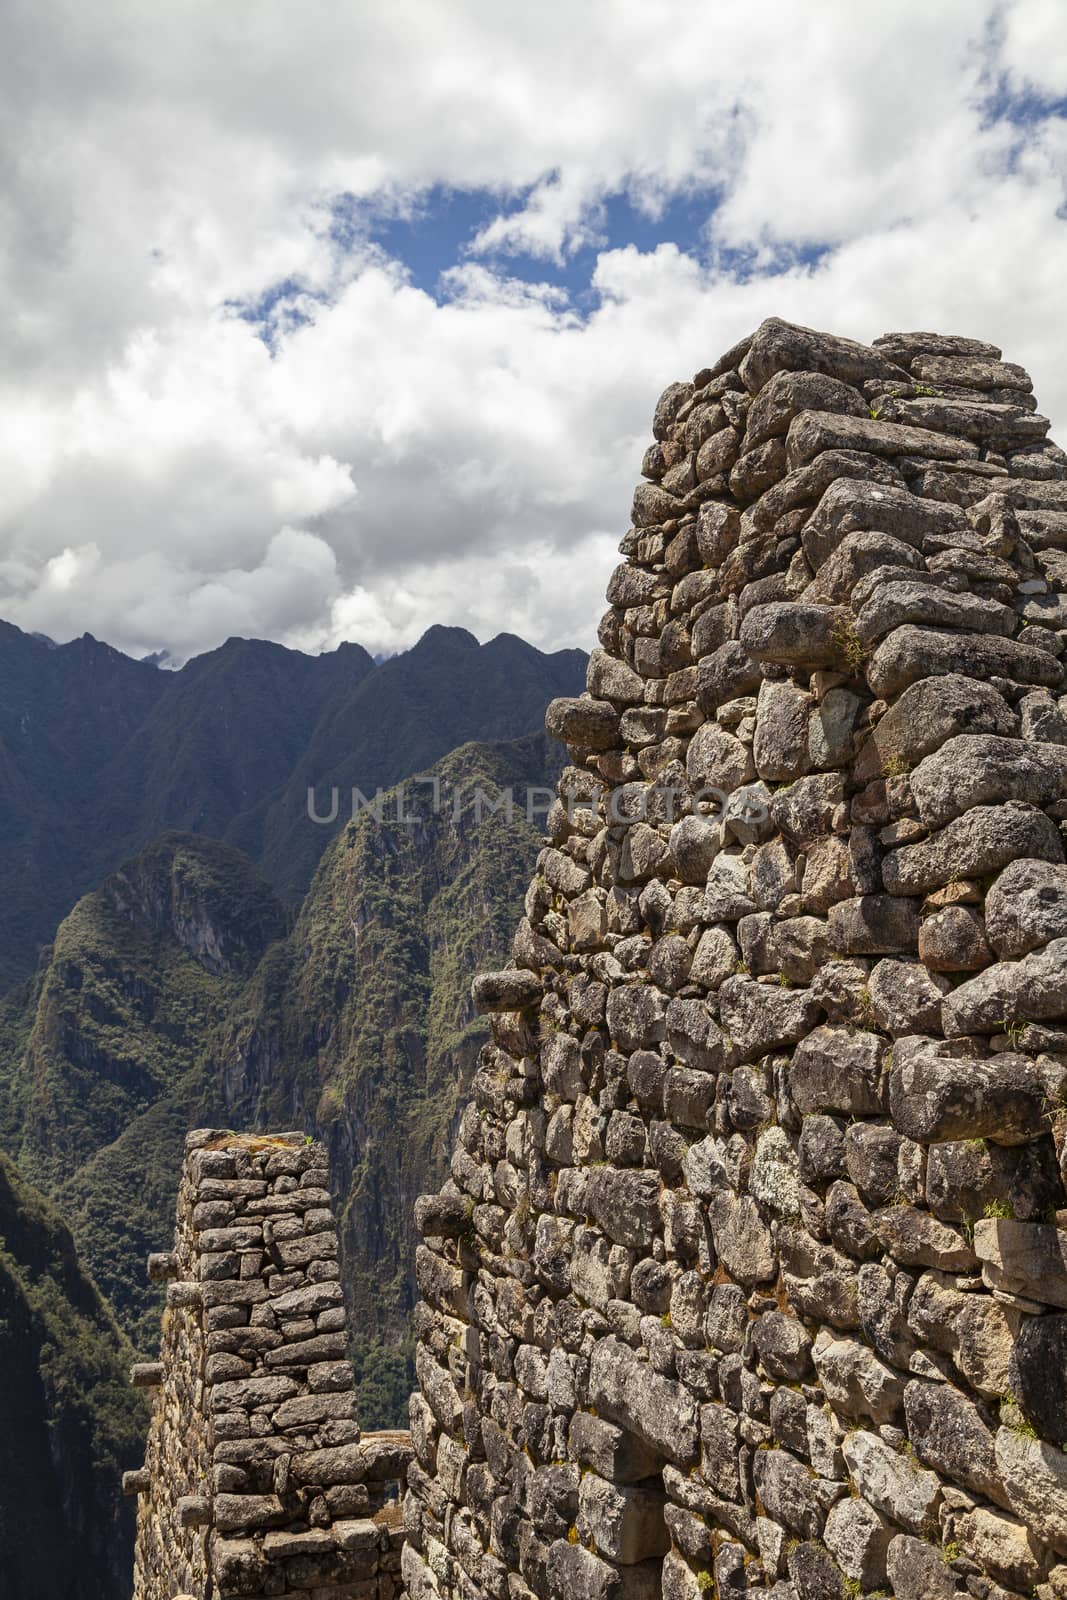 Architecture and details of the Inca constructions in Machu Picchu, Peru by alvarobueno